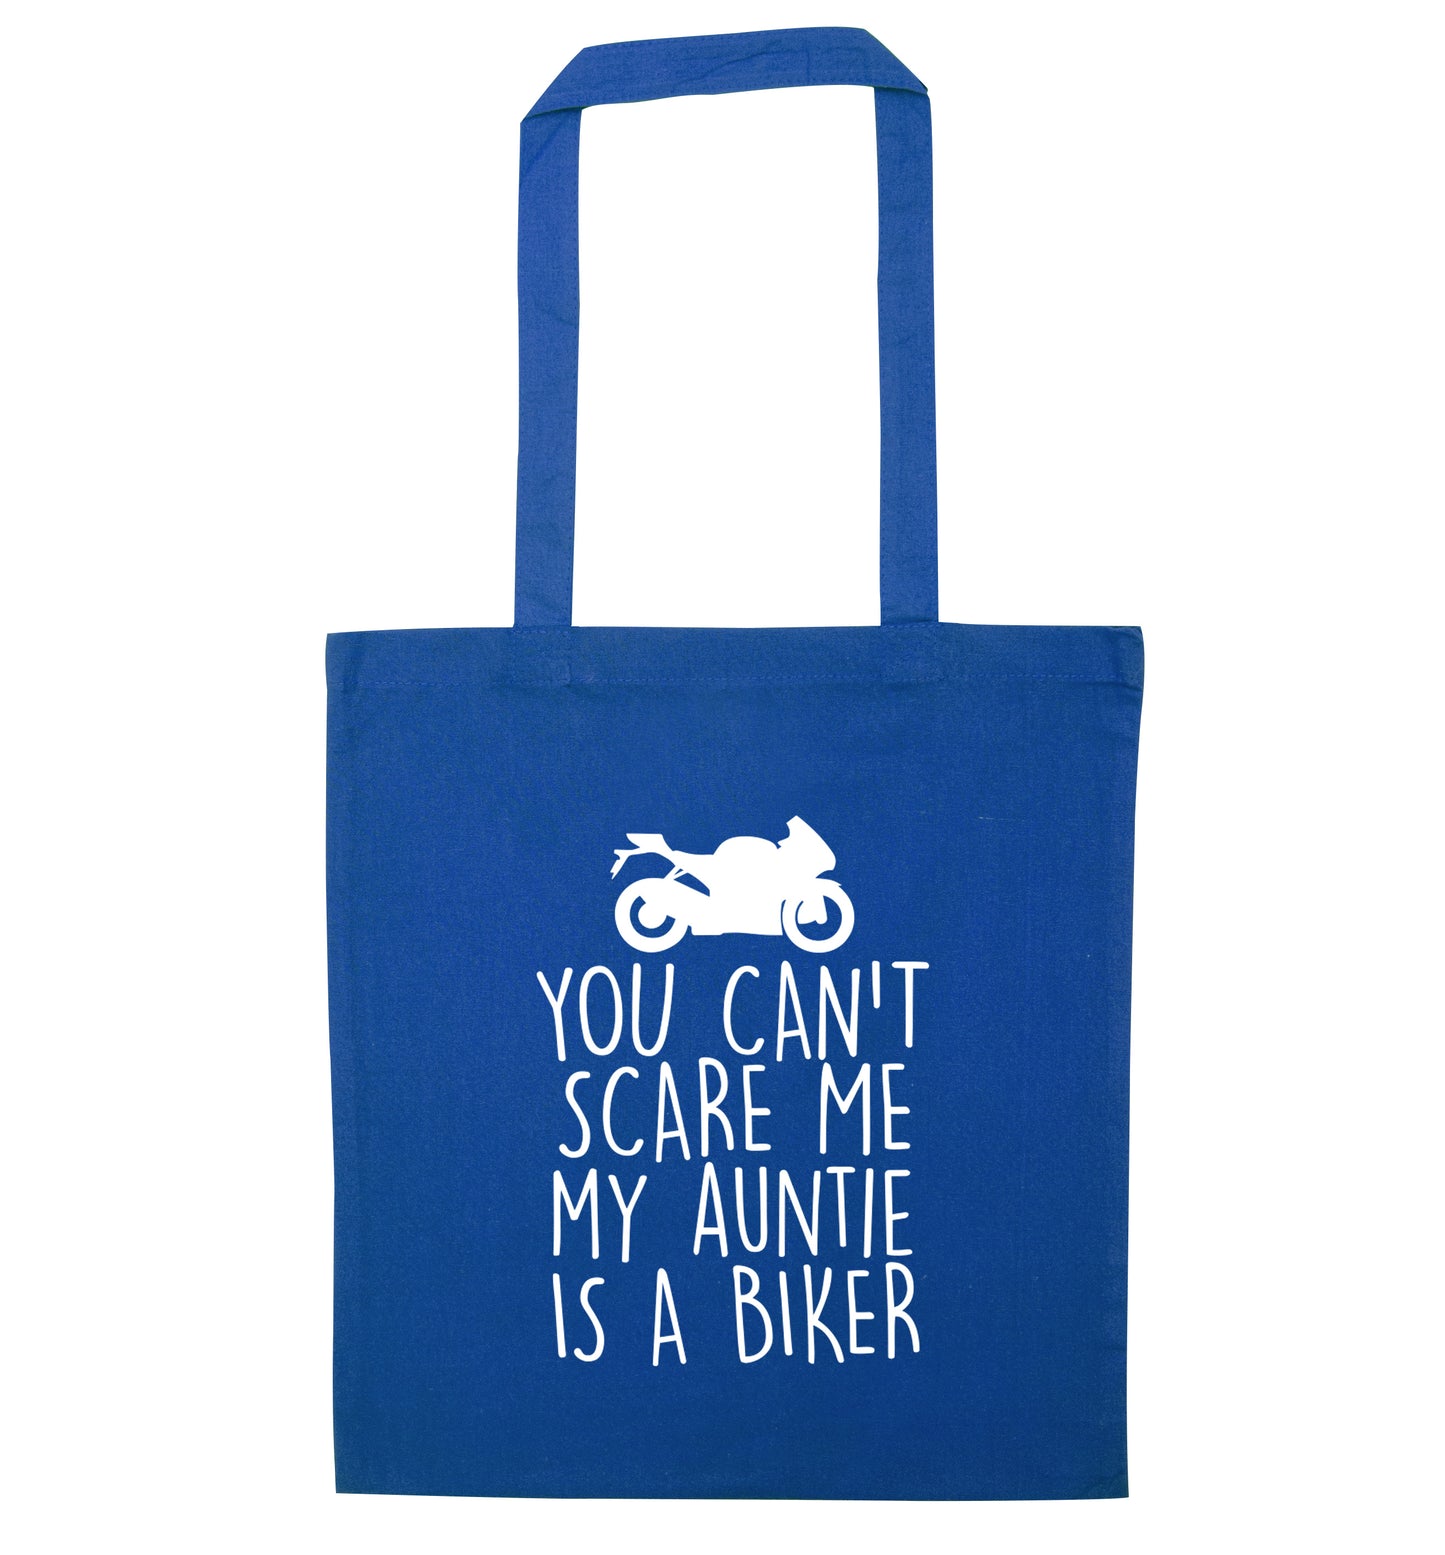 You can't scare me my auntie is a biker blue tote bag